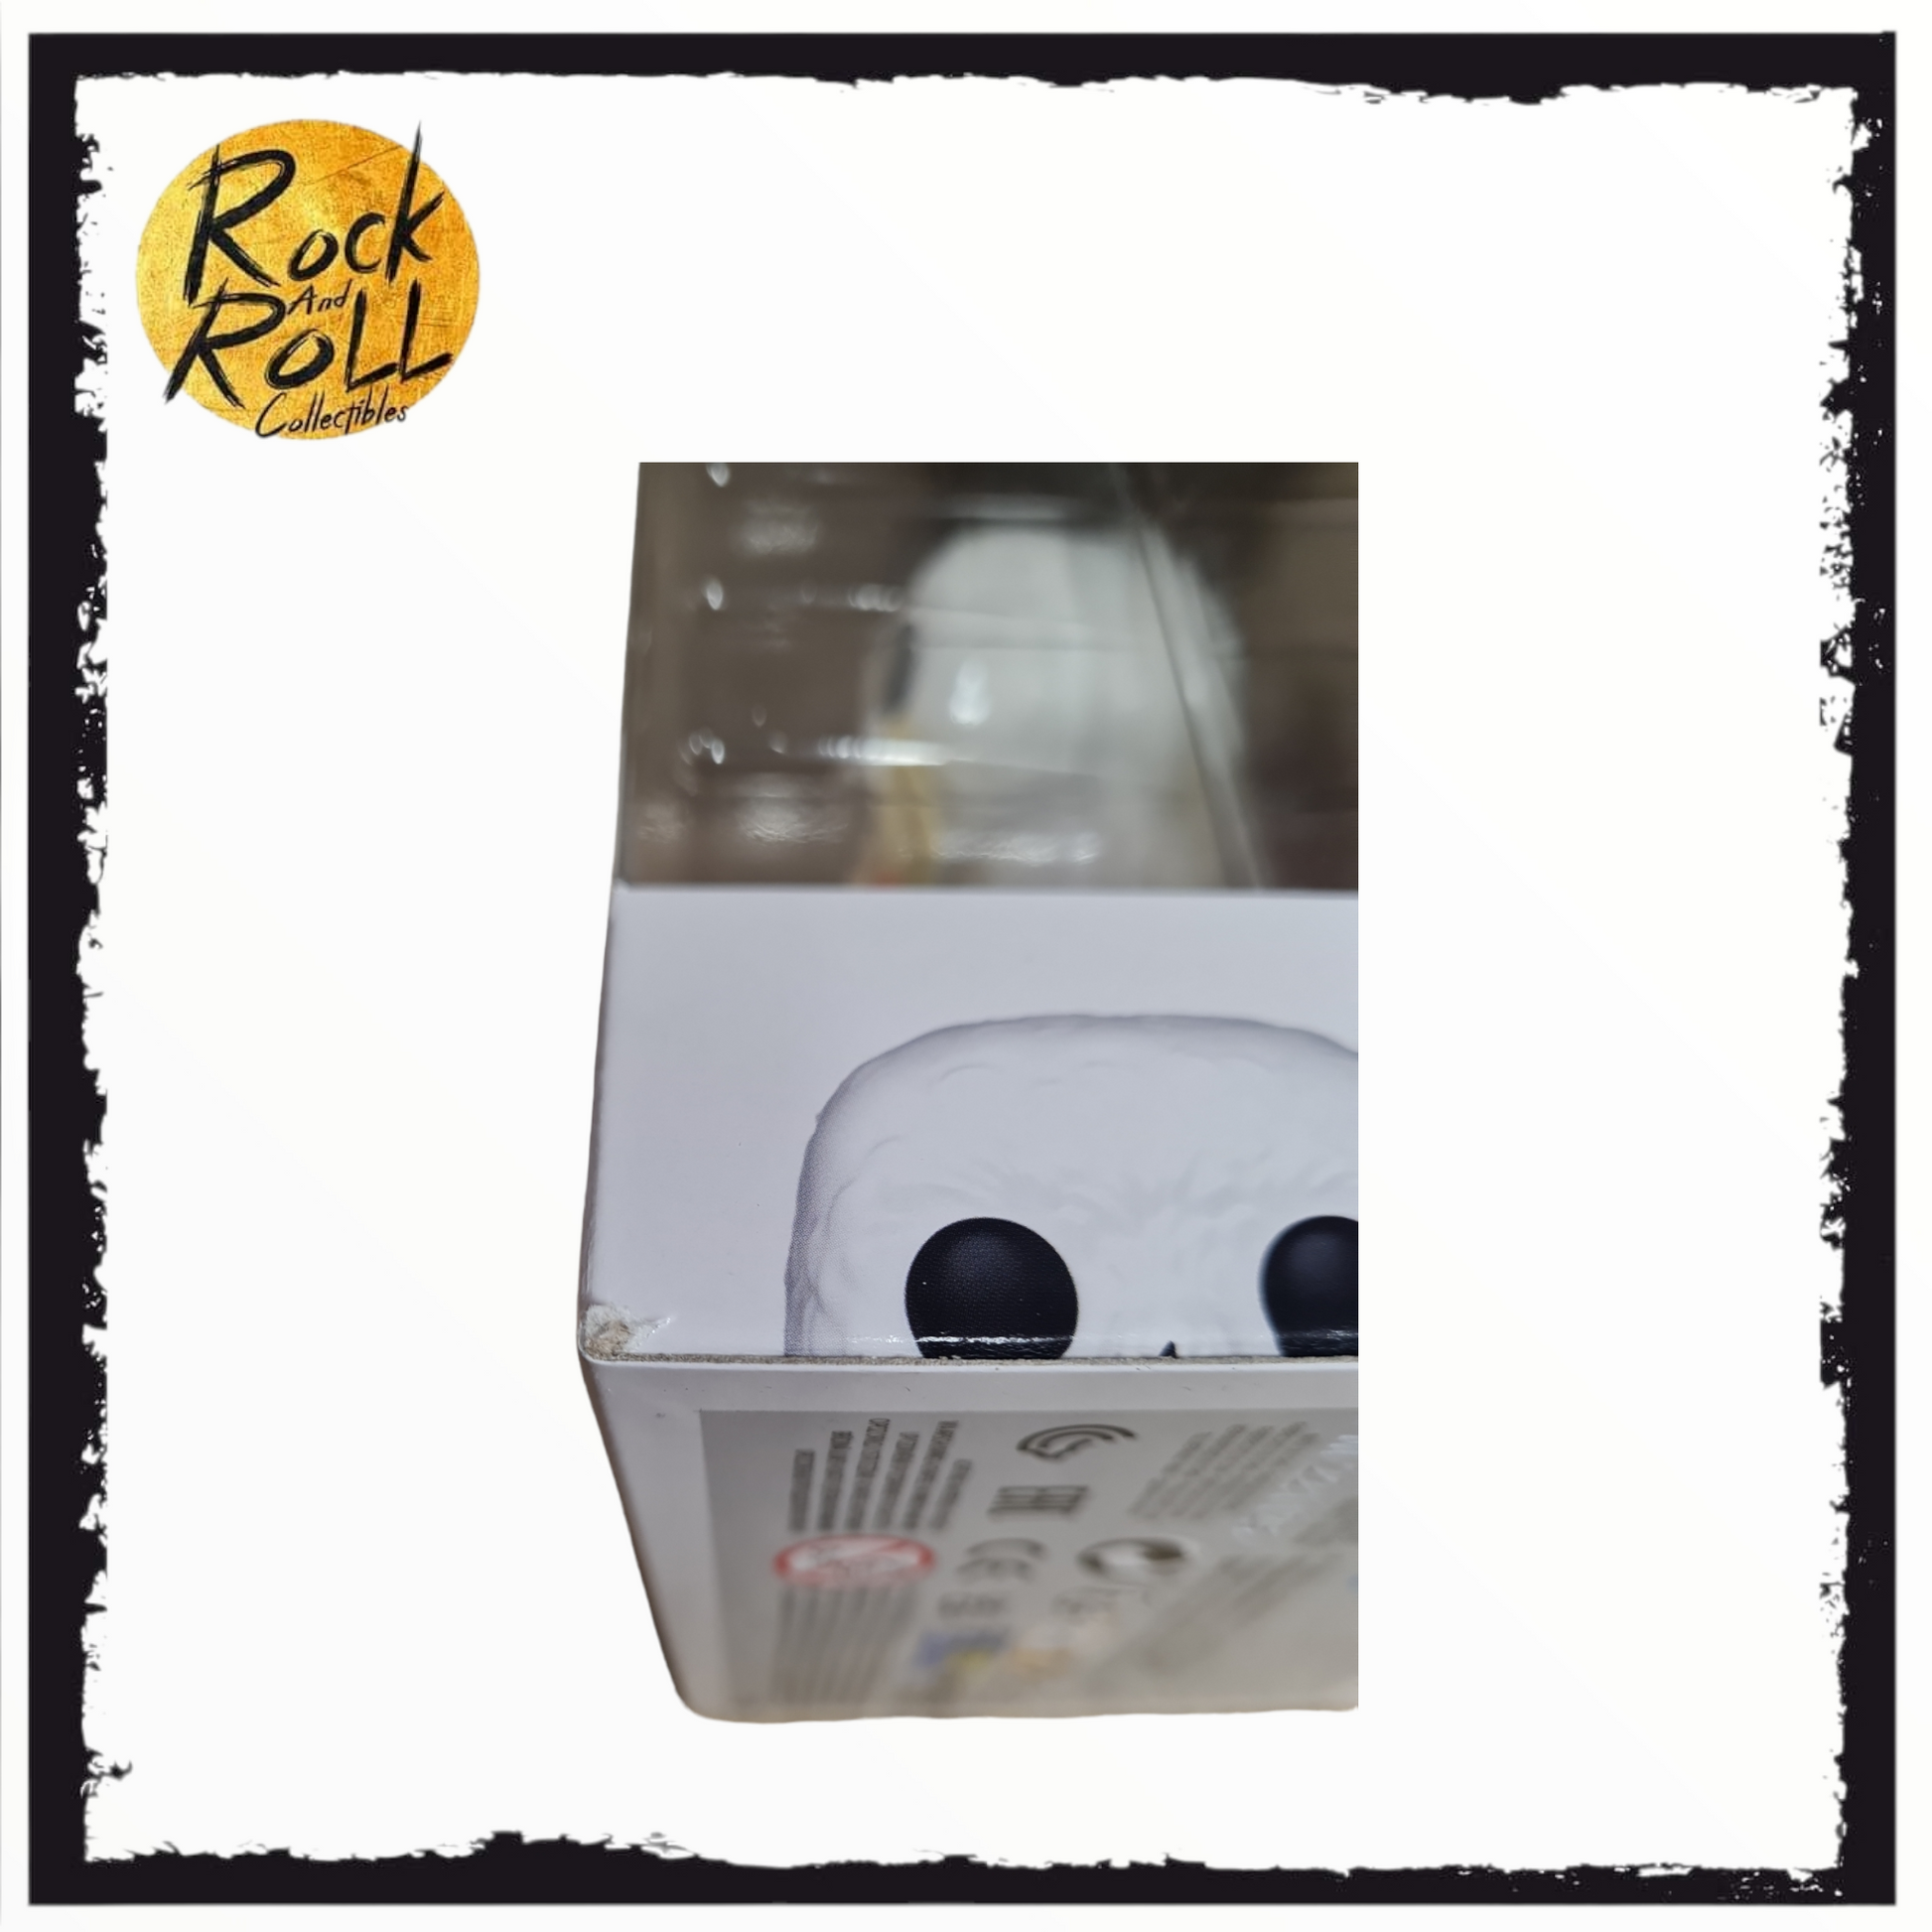 Hedwig With Letter Harry Potter Funko POP! Official WonderCon